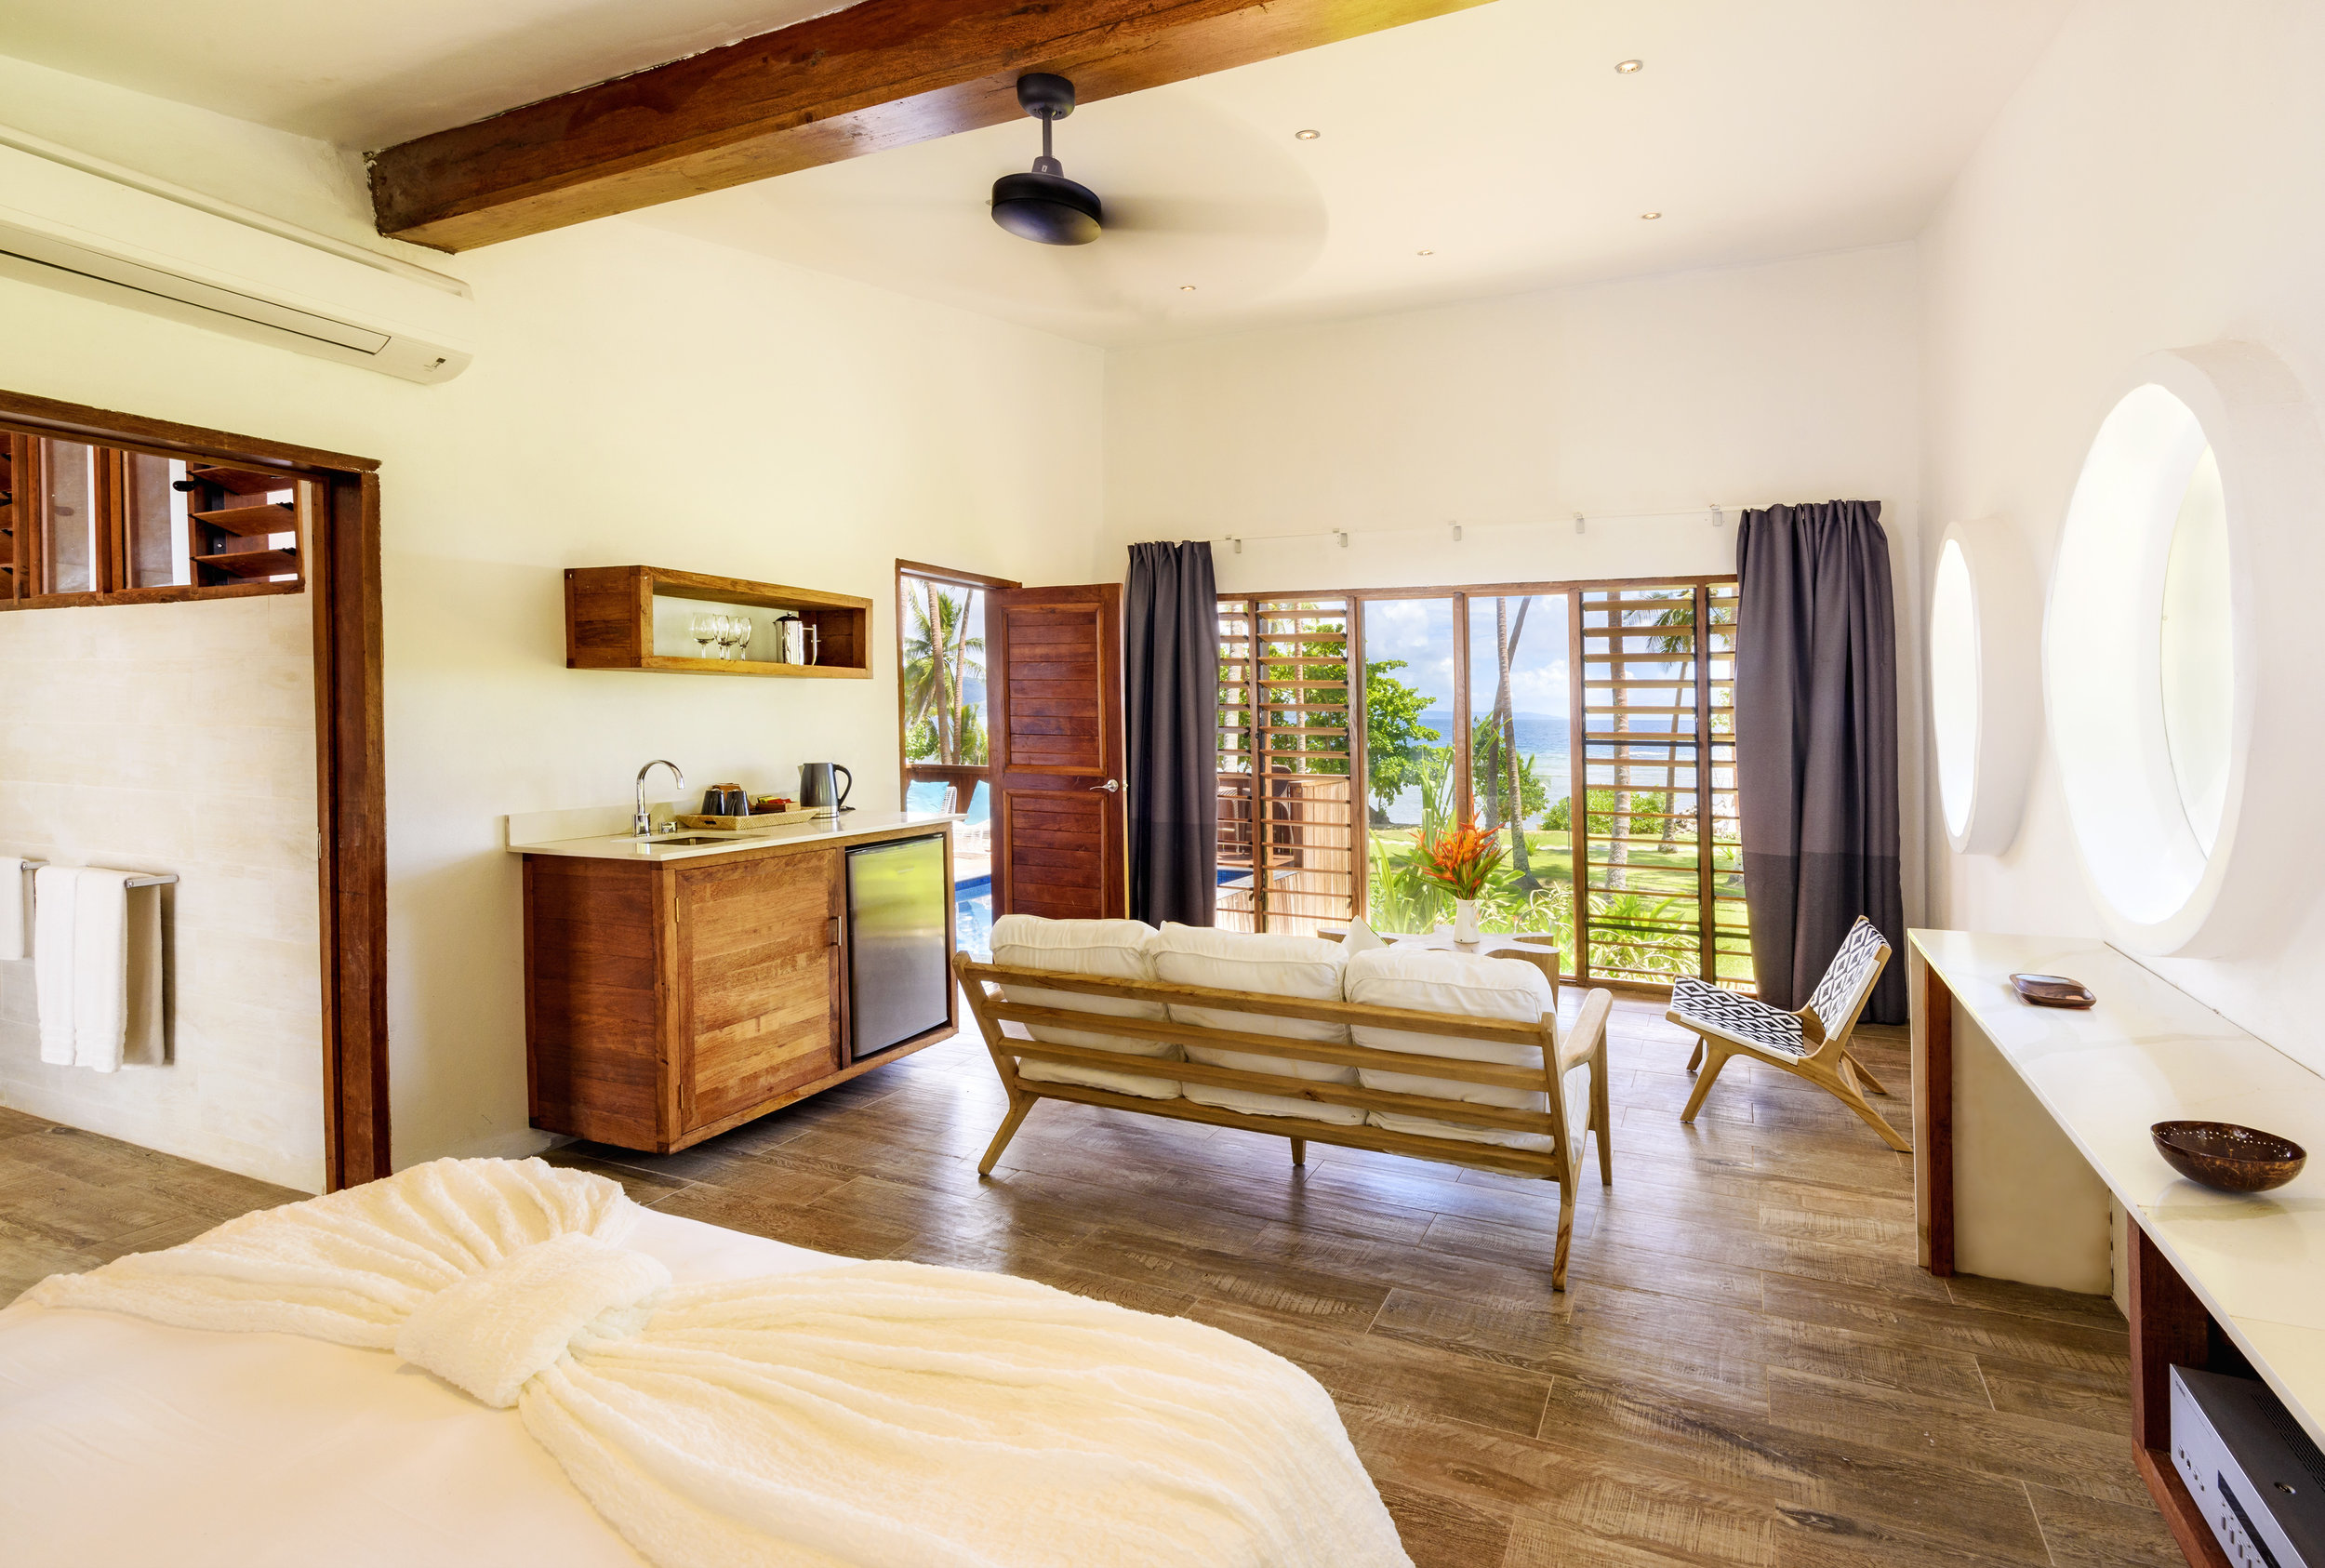 Two-bedroom Royal Retreat - Ocean view from the bedroom, The Remote Resort Fiji Islands